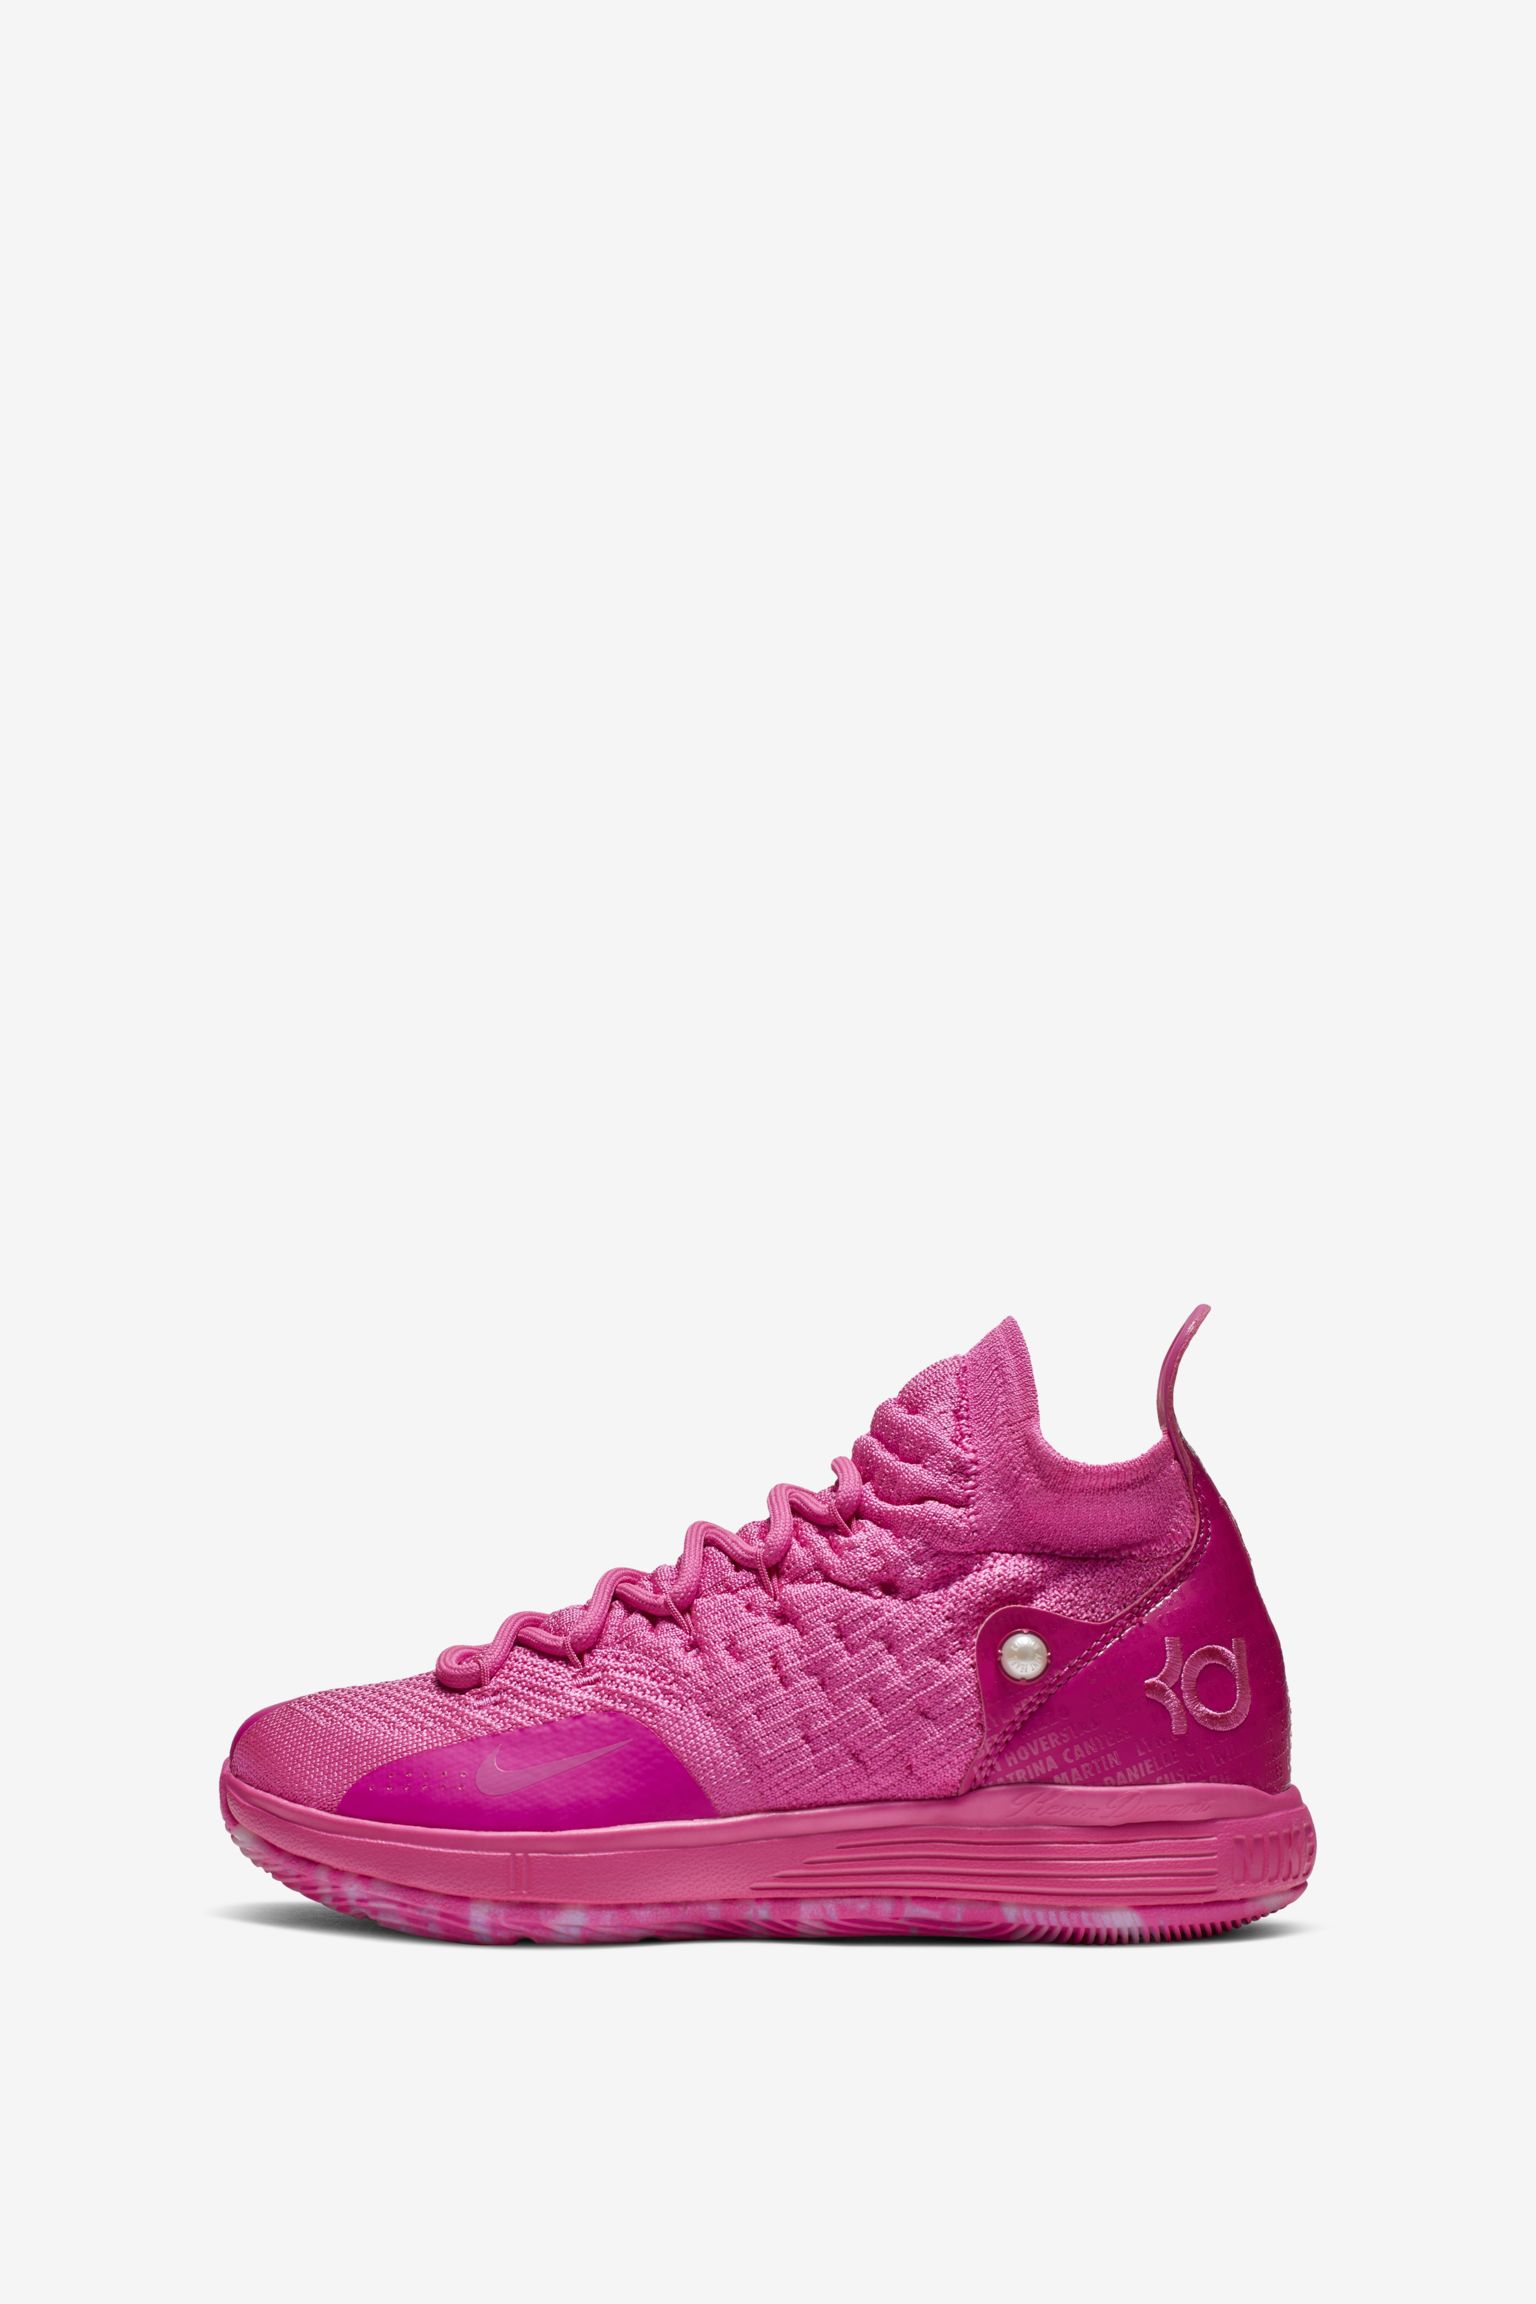 Nike KD 11 'Aunt Pearl' Release Date. Nike SNKRS